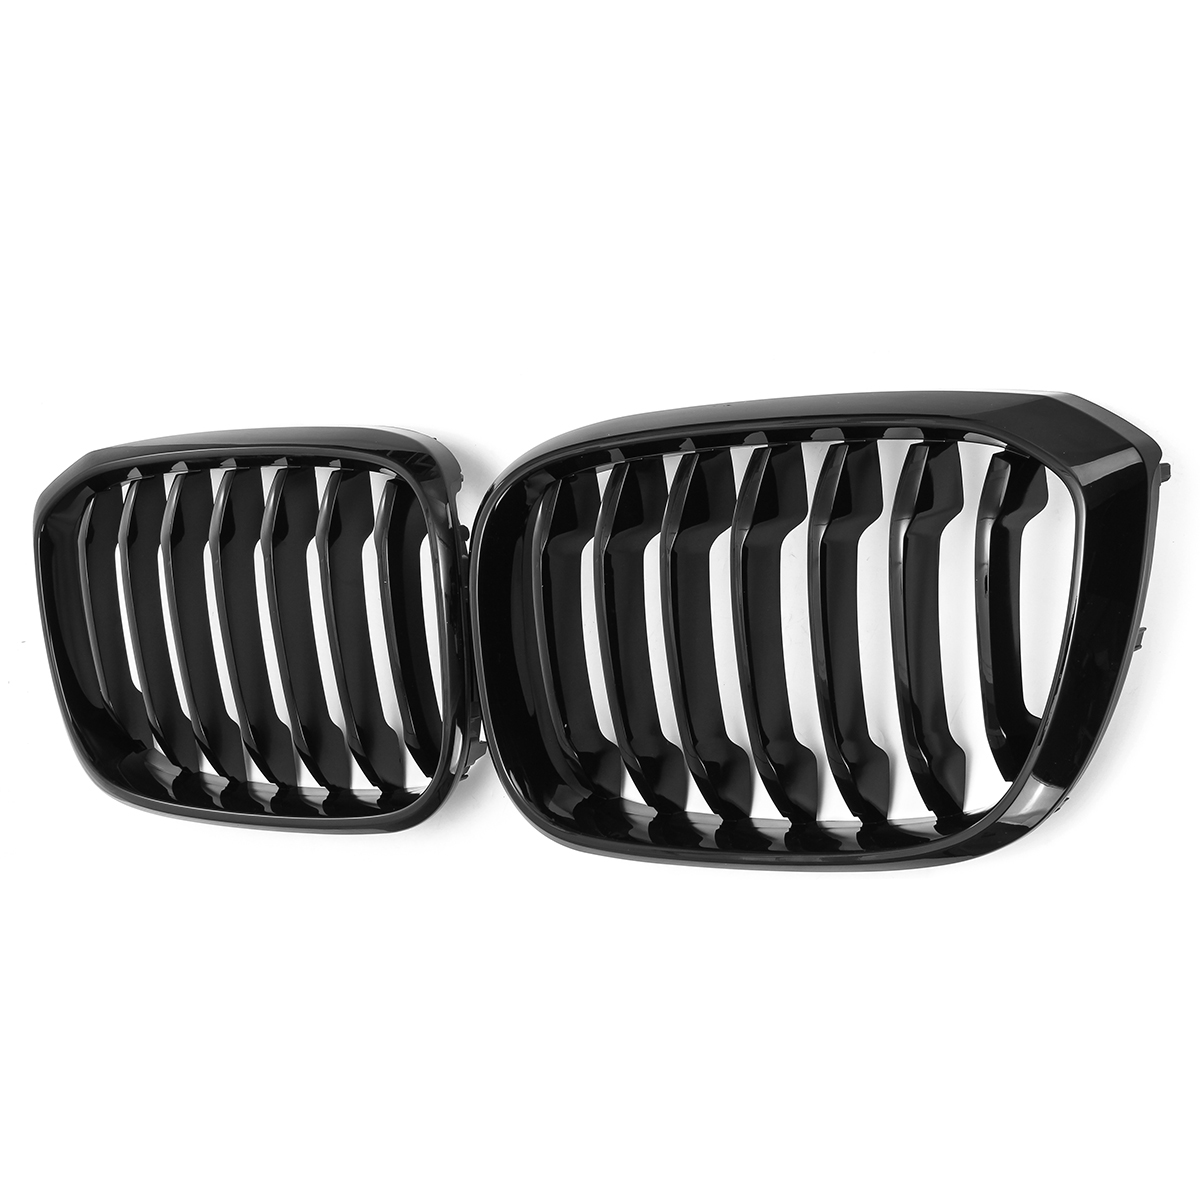 Pair Grill Front Hood Kidney Bumper Grille For BMW G01 G08 X3 G02 X4 2018-2022